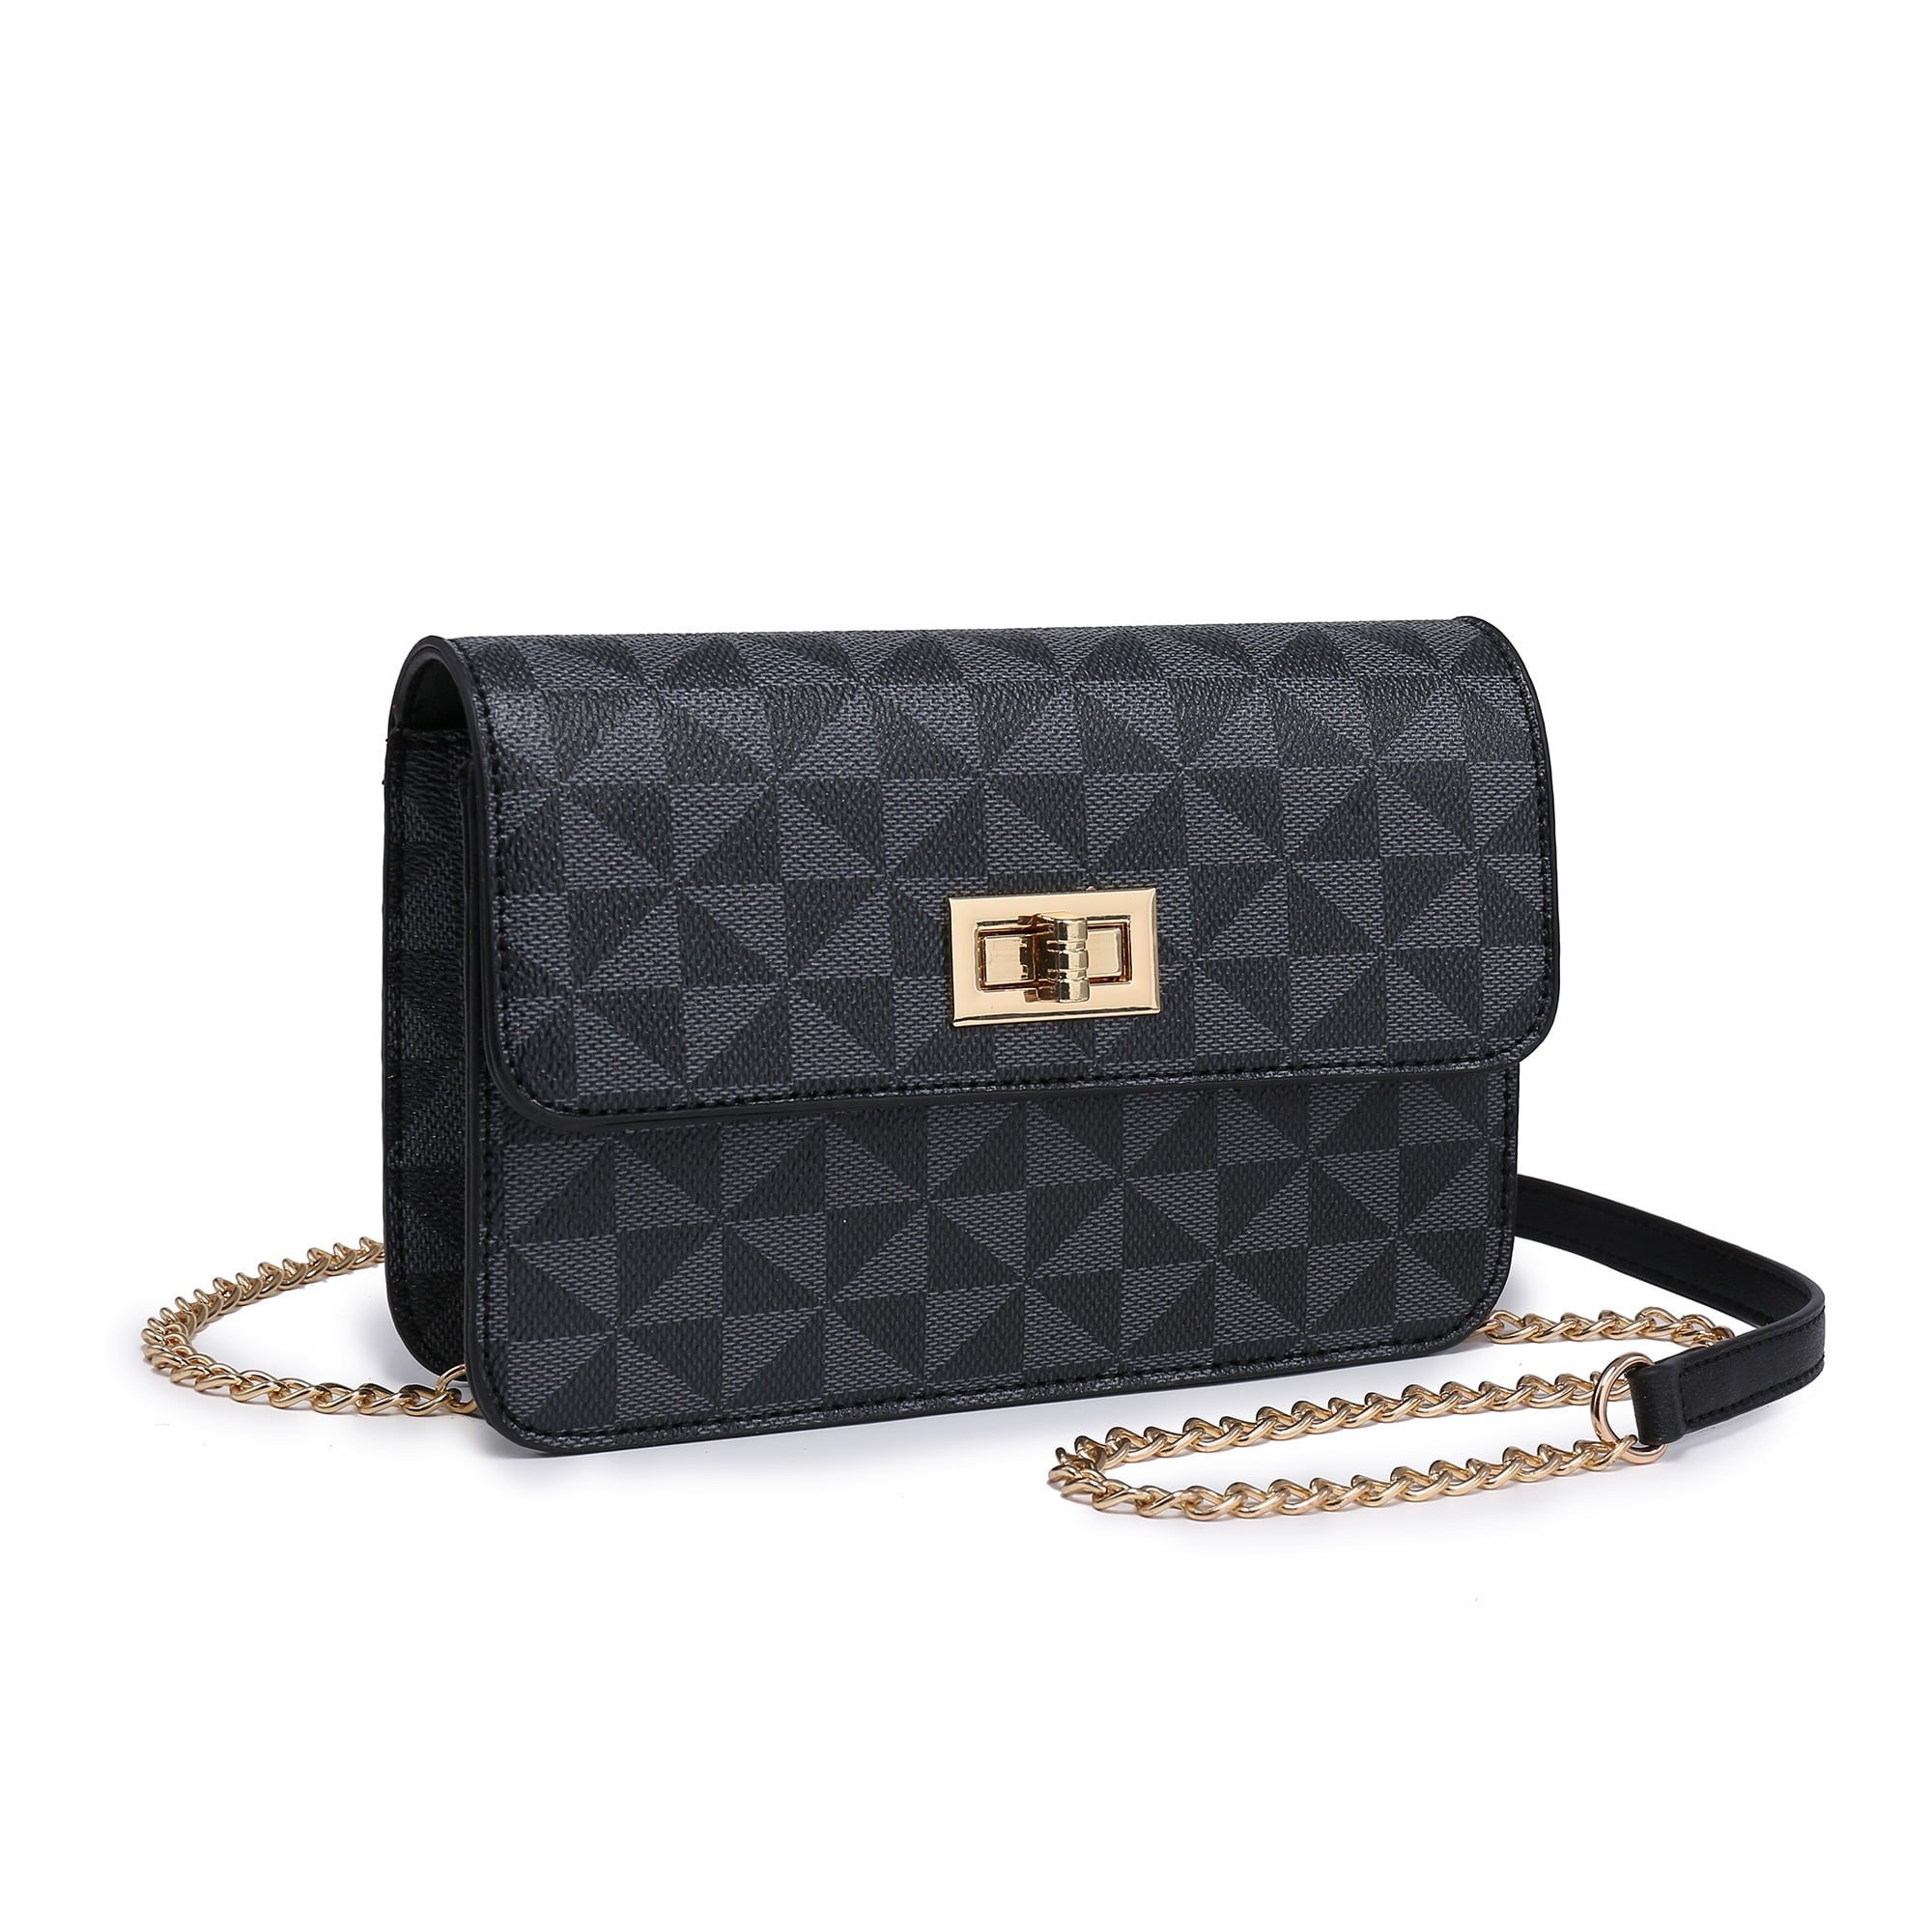 Quilted Bags & Purse for Women - ROMY TISA